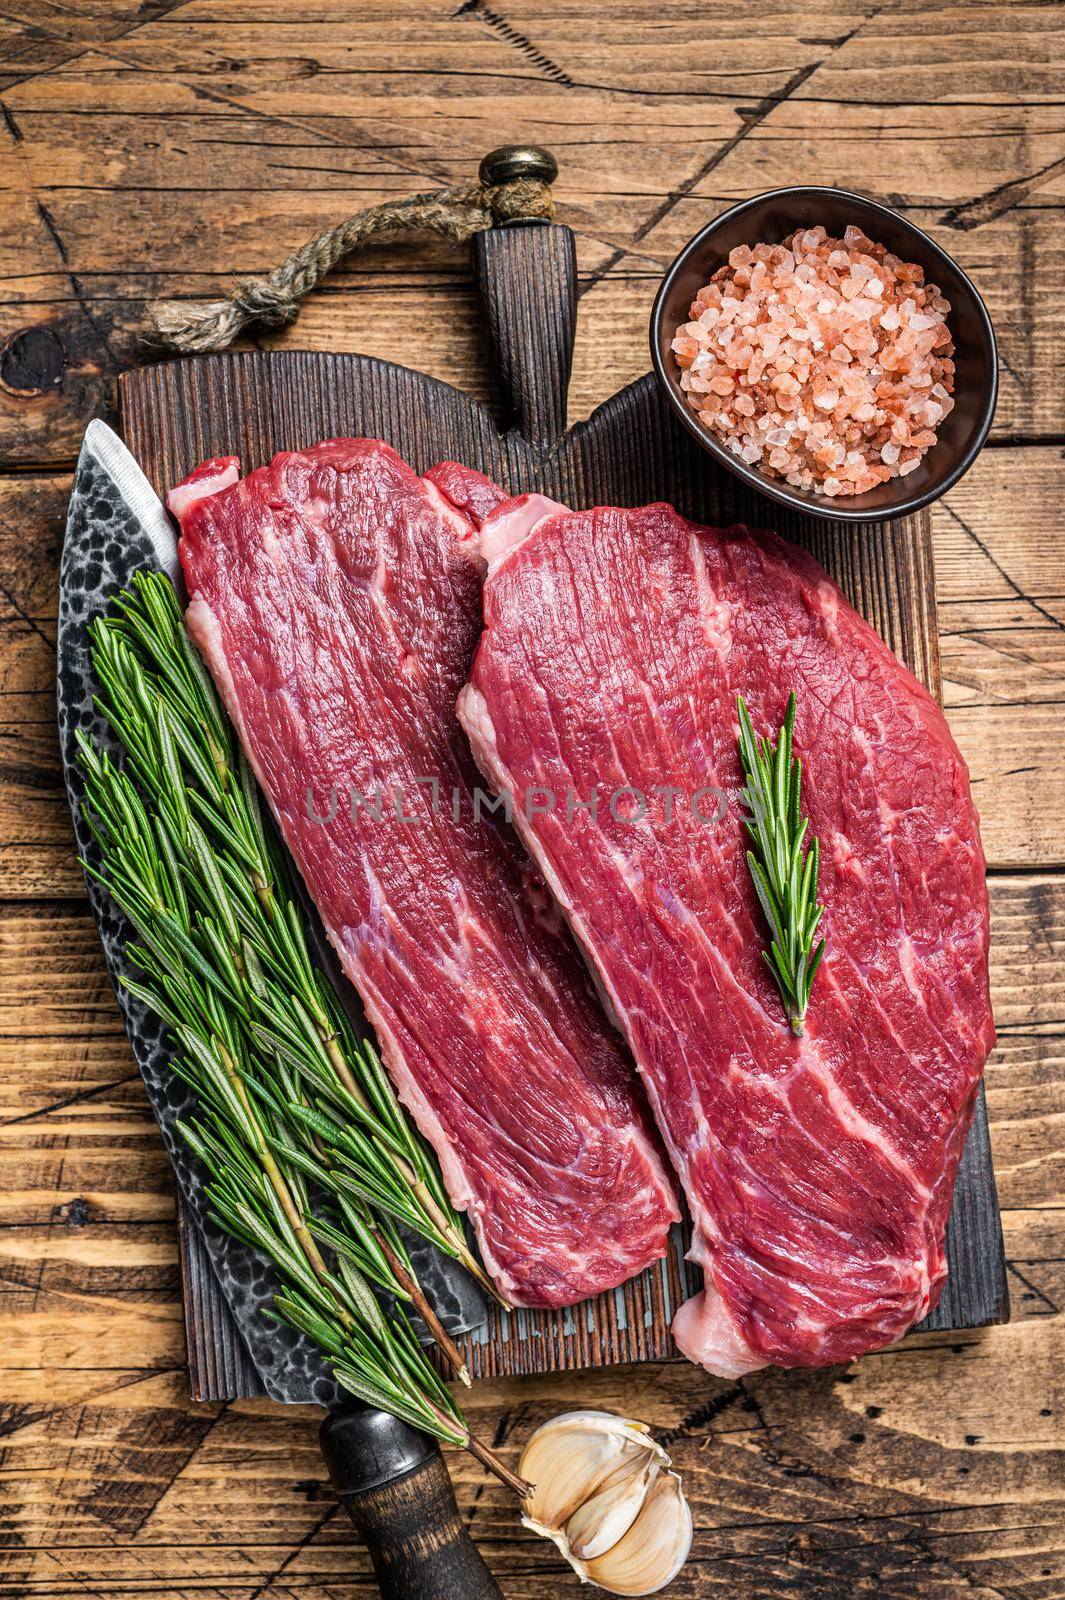 Raw rump cap steak or Picanha steak on wooden board with butcher knife. wooden background. Top view by Composter